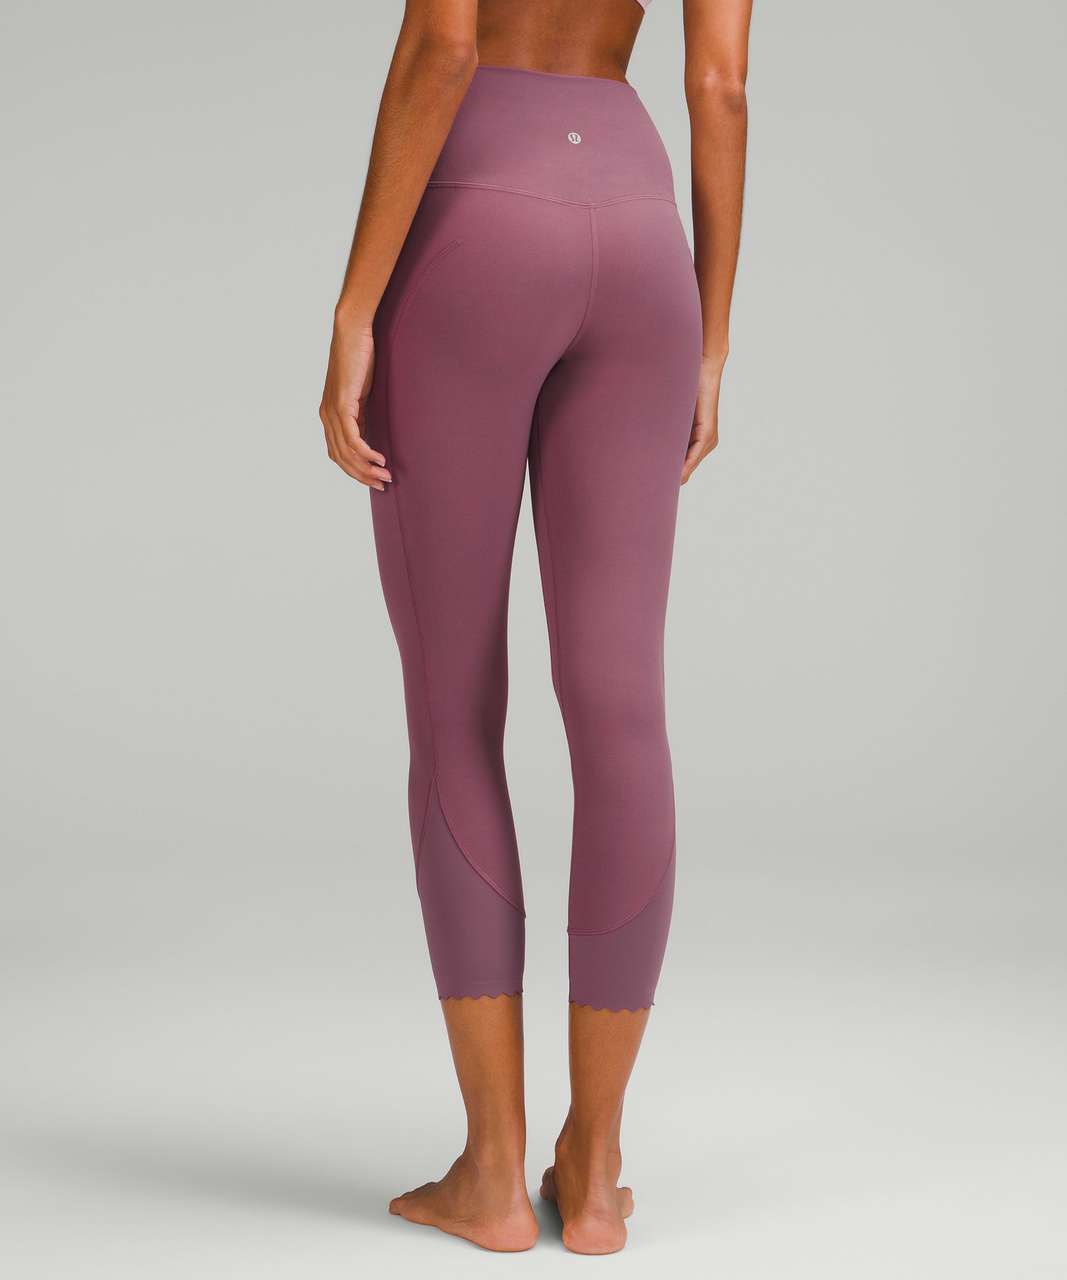 Lululemon Align High Rise Leggings Scalloped Hem Charged Indigo Purple 8  NWT - $99 New With Tags - From Marie